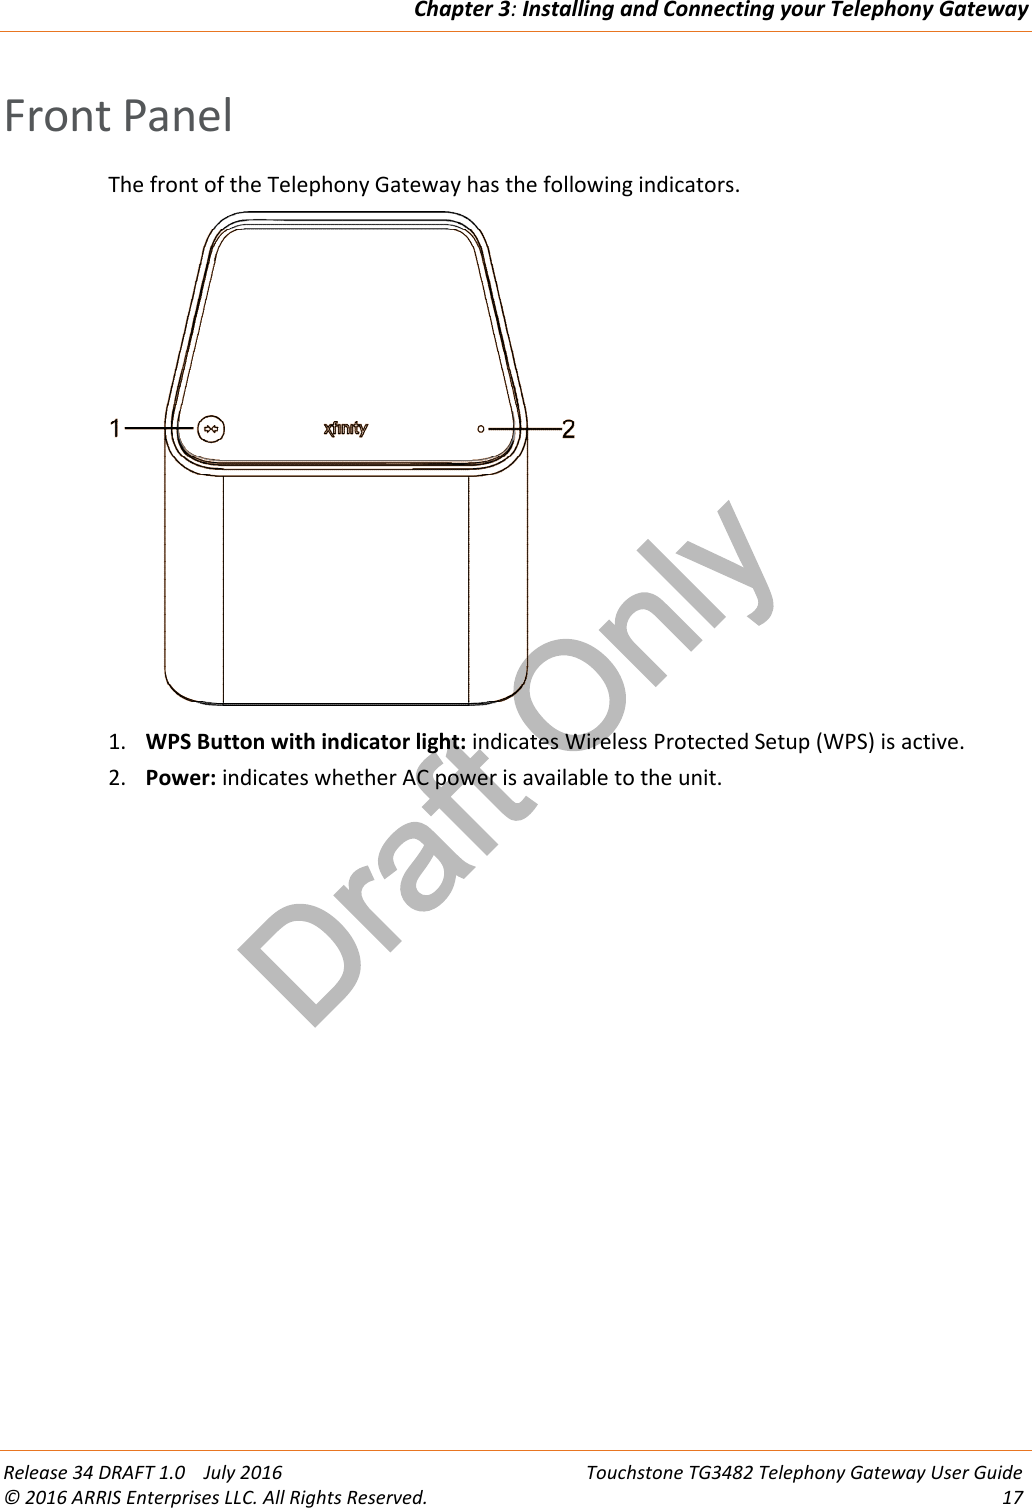 Draft OnlyChapter 3:Installing and Connecting your Telephony GatewayRelease 34 DRAFT 1.0 July 2016 Touchstone TG3482 Telephony Gateway User Guide© 2016 ARRIS Enterprises LLC. All Rights Reserved. 17Front PanelThe front of the Telephony Gateway has the following indicators.1. WPS Button with indicator light: indicates Wireless Protected Setup (WPS) is active.2. Power: indicates whether AC power is available to the unit.